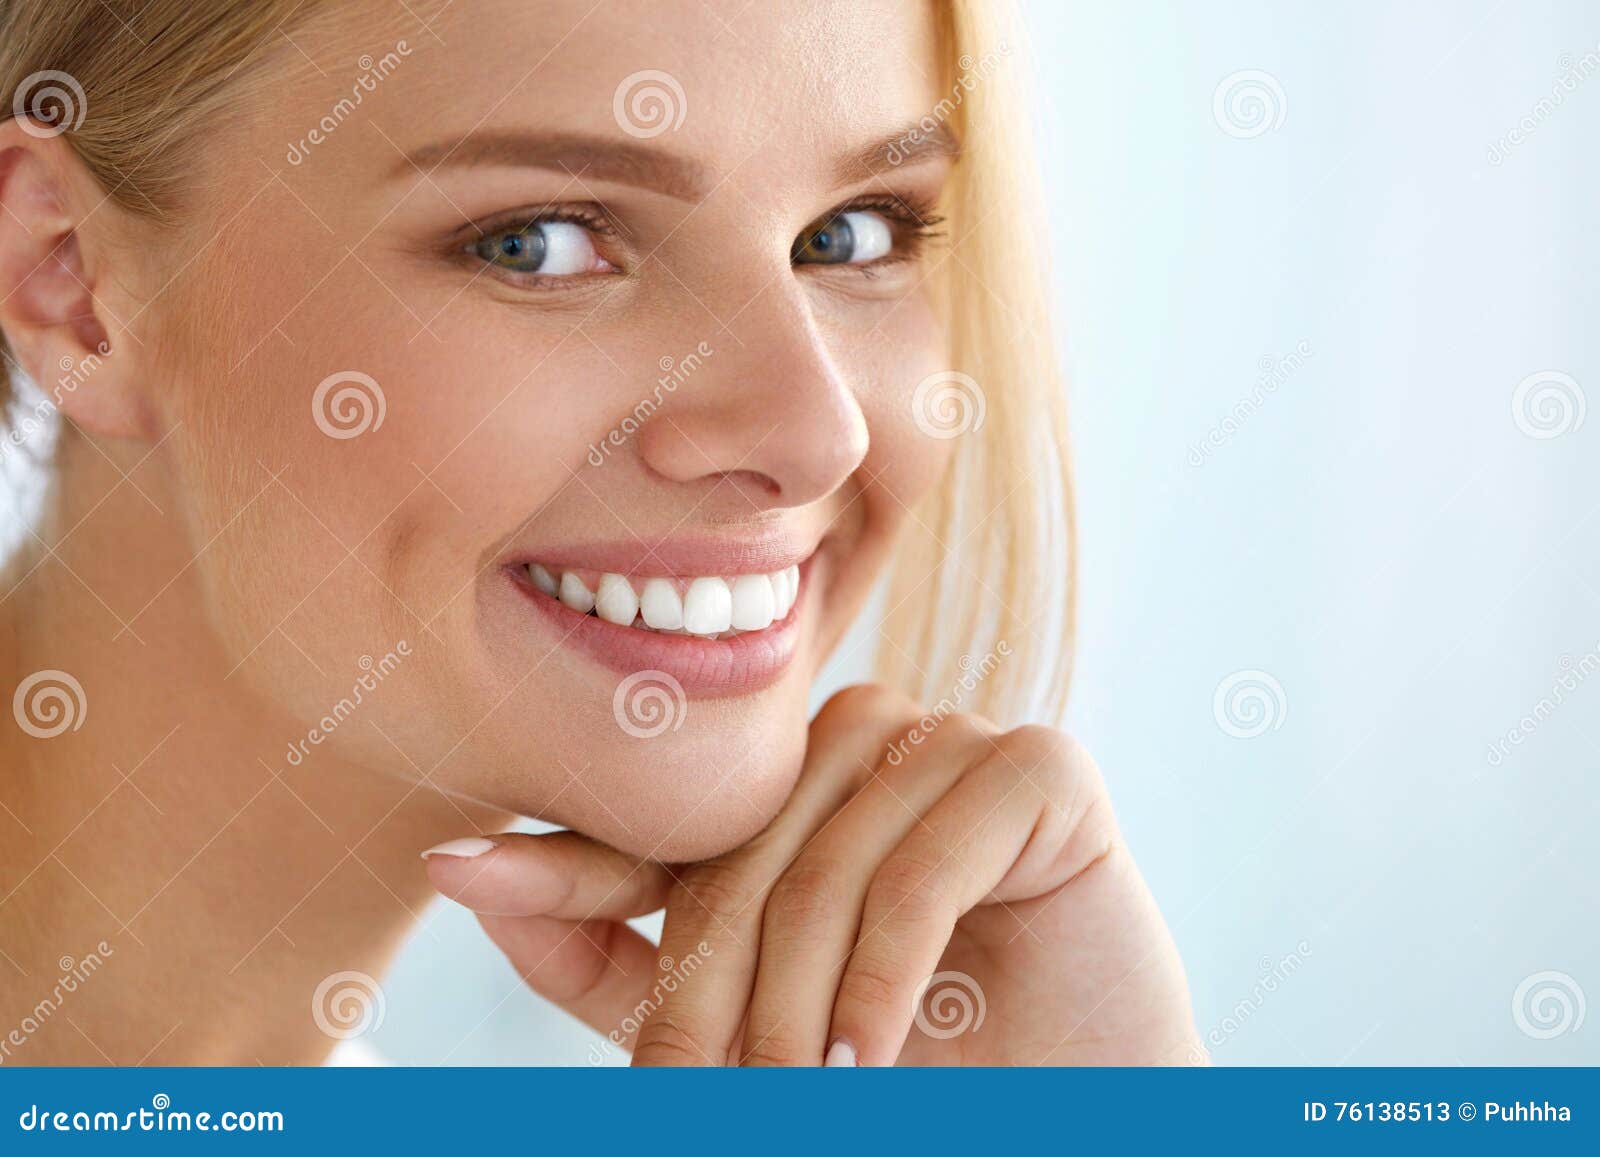 beauty portrait of woman with beautiful smile fresh face smiling